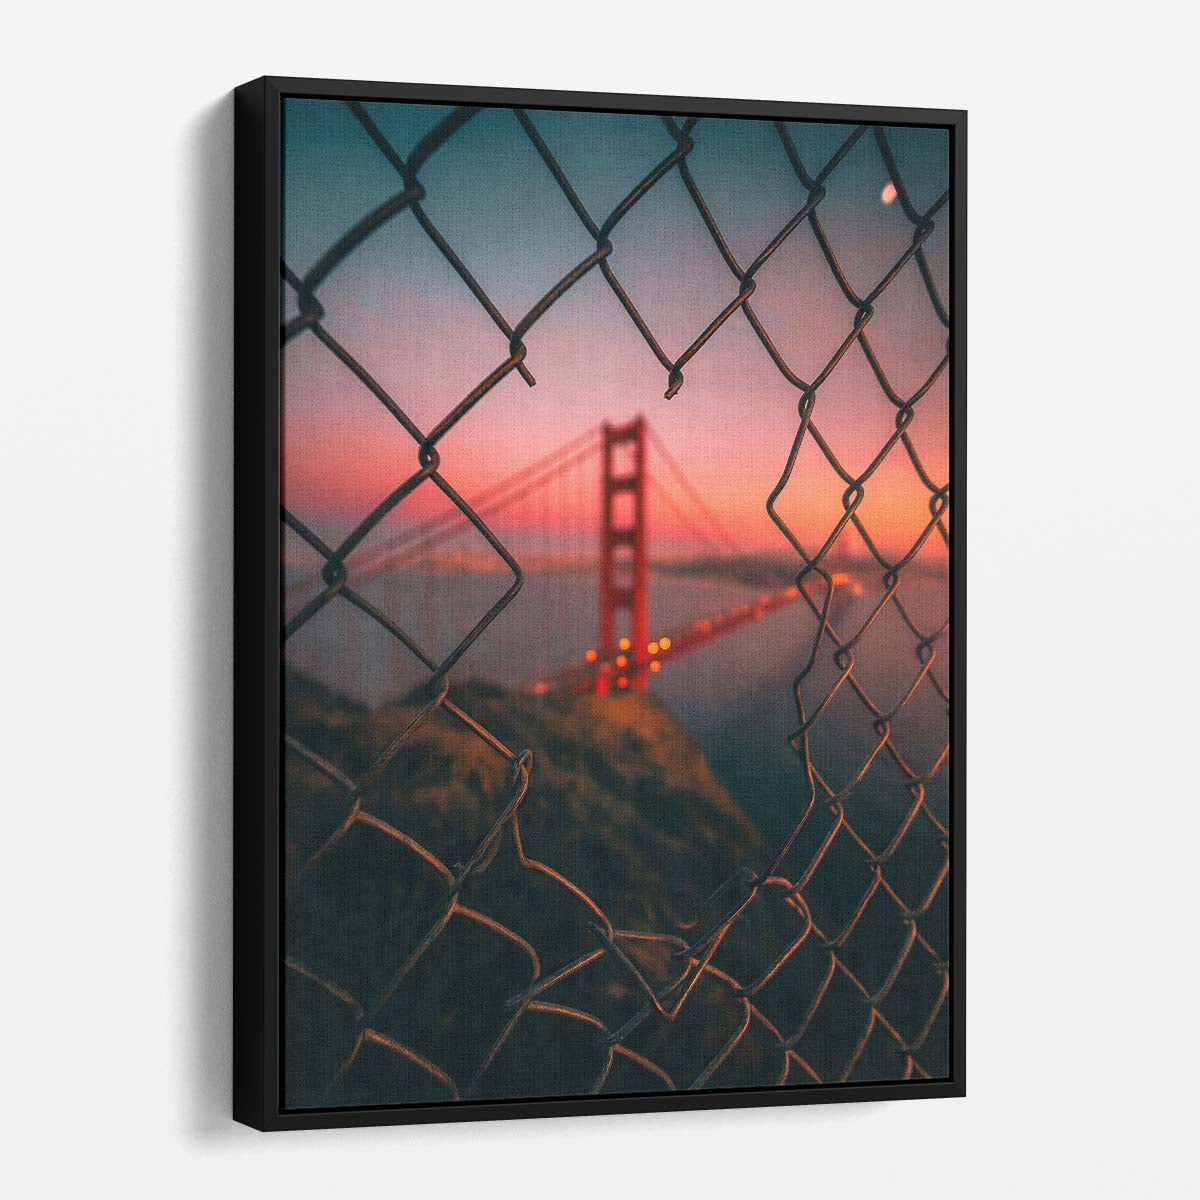 Iconic Golden Gate Bridge, San Francisco Sunset Photography Art by Luxuriance Designs, made in USA